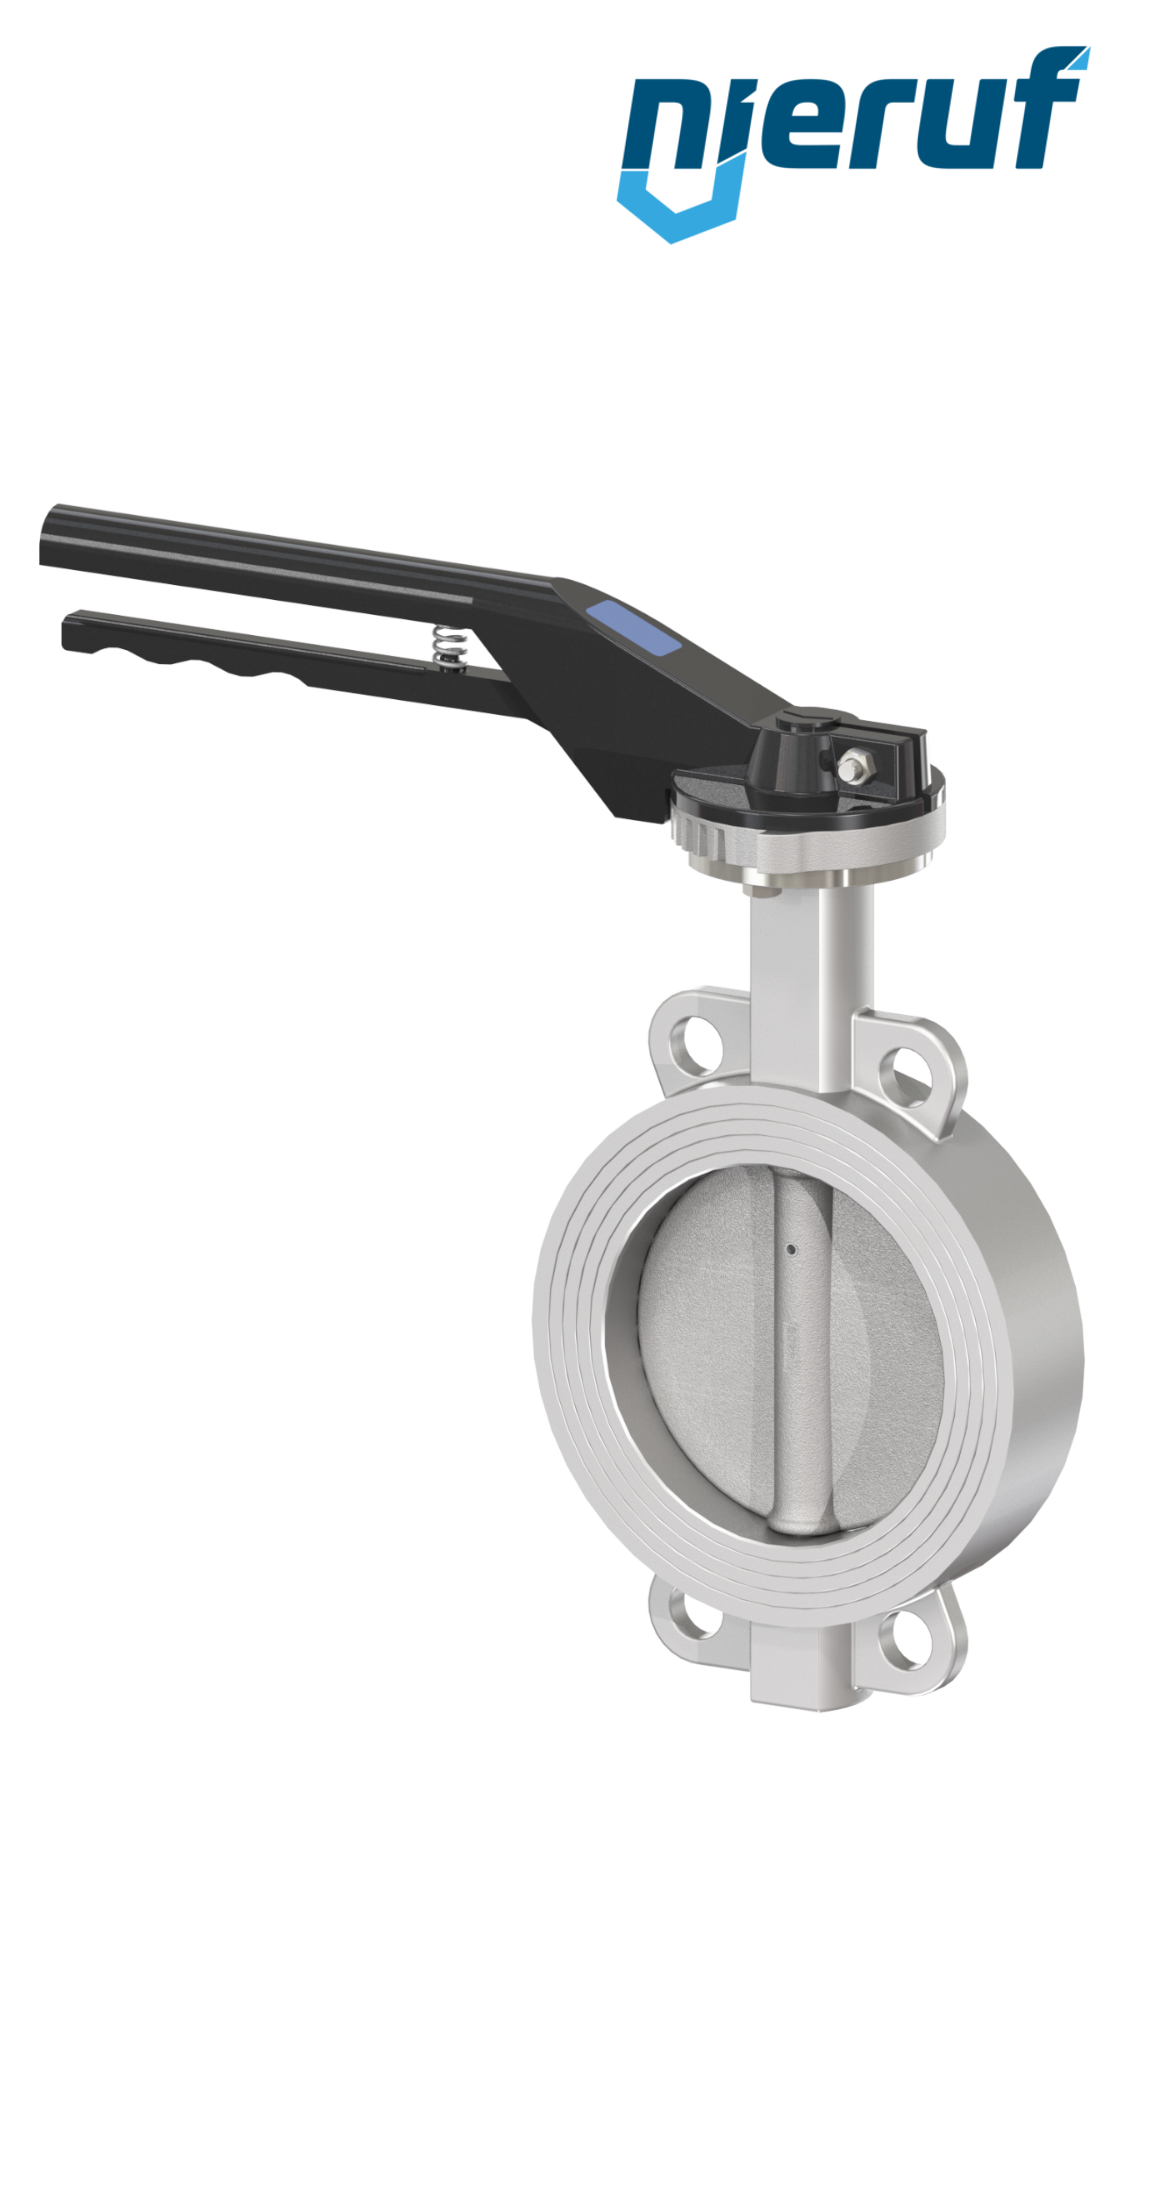 Butterfly-valve-stainless-steel DN250 PN16 AK08 metall notch lever